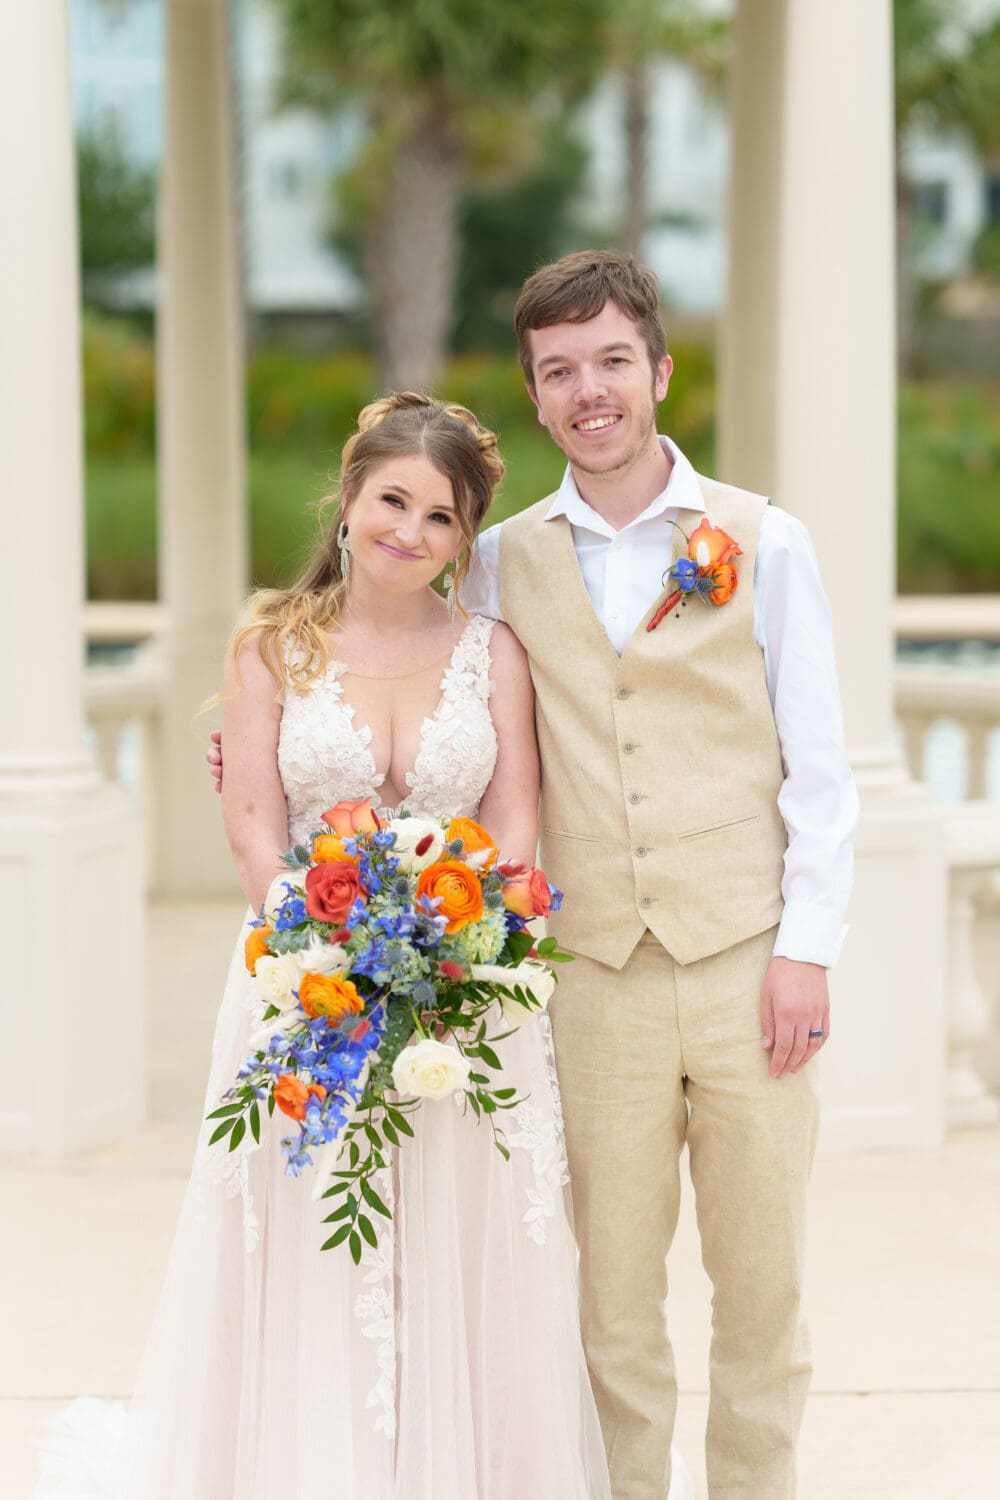 Bride with her brother - 21 Main Events - North Myrtle Beach